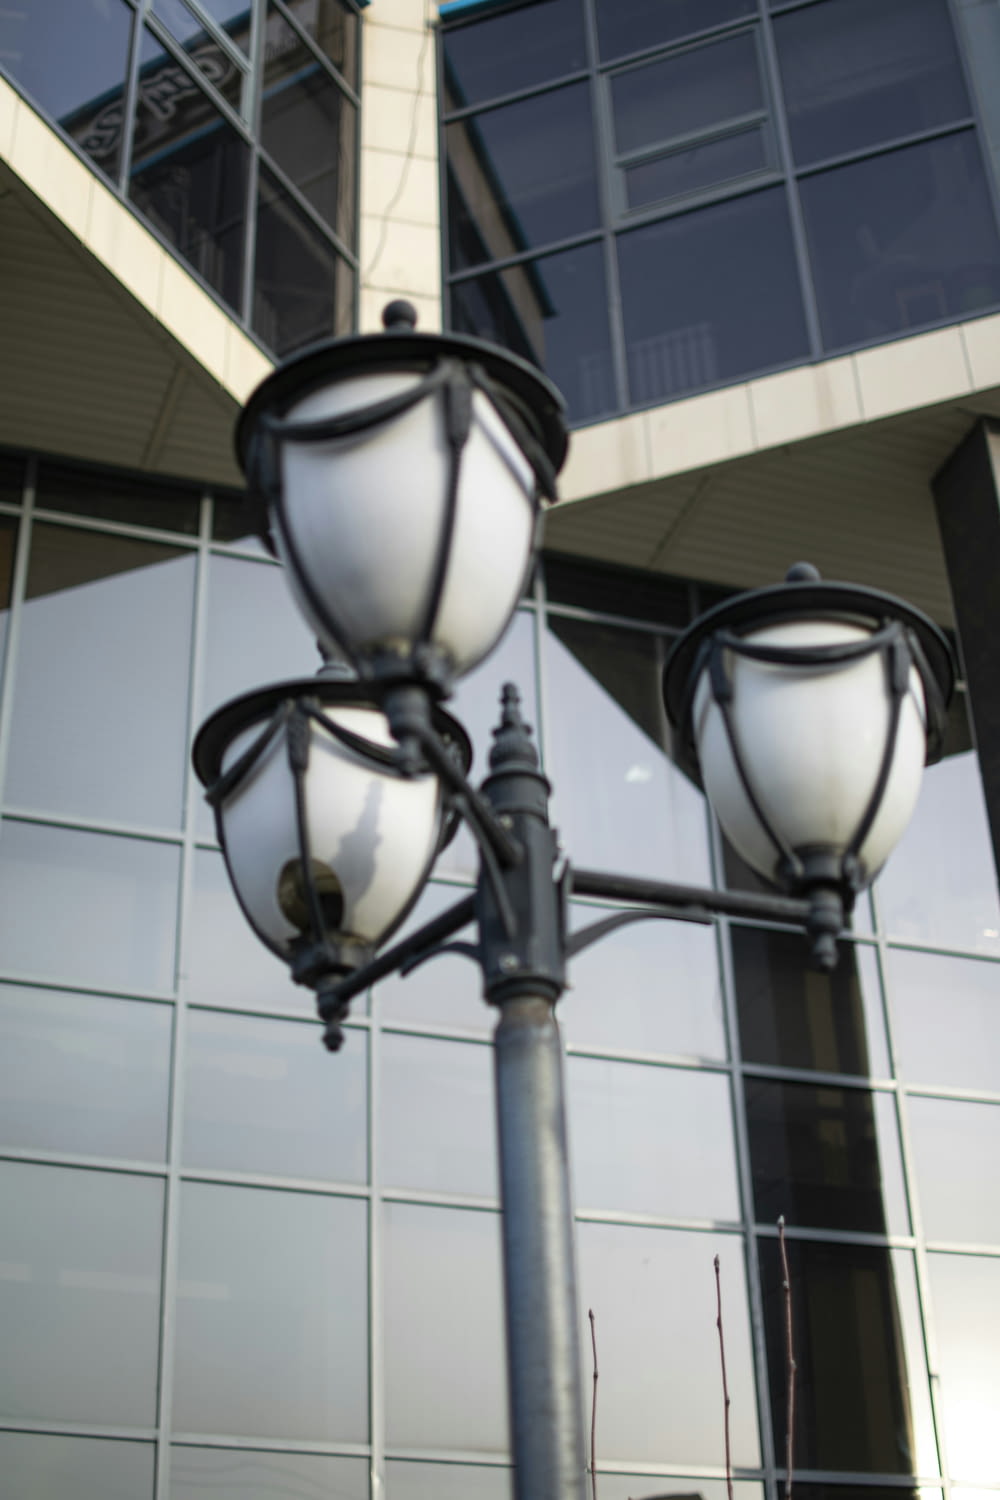 a street light with a building in the background